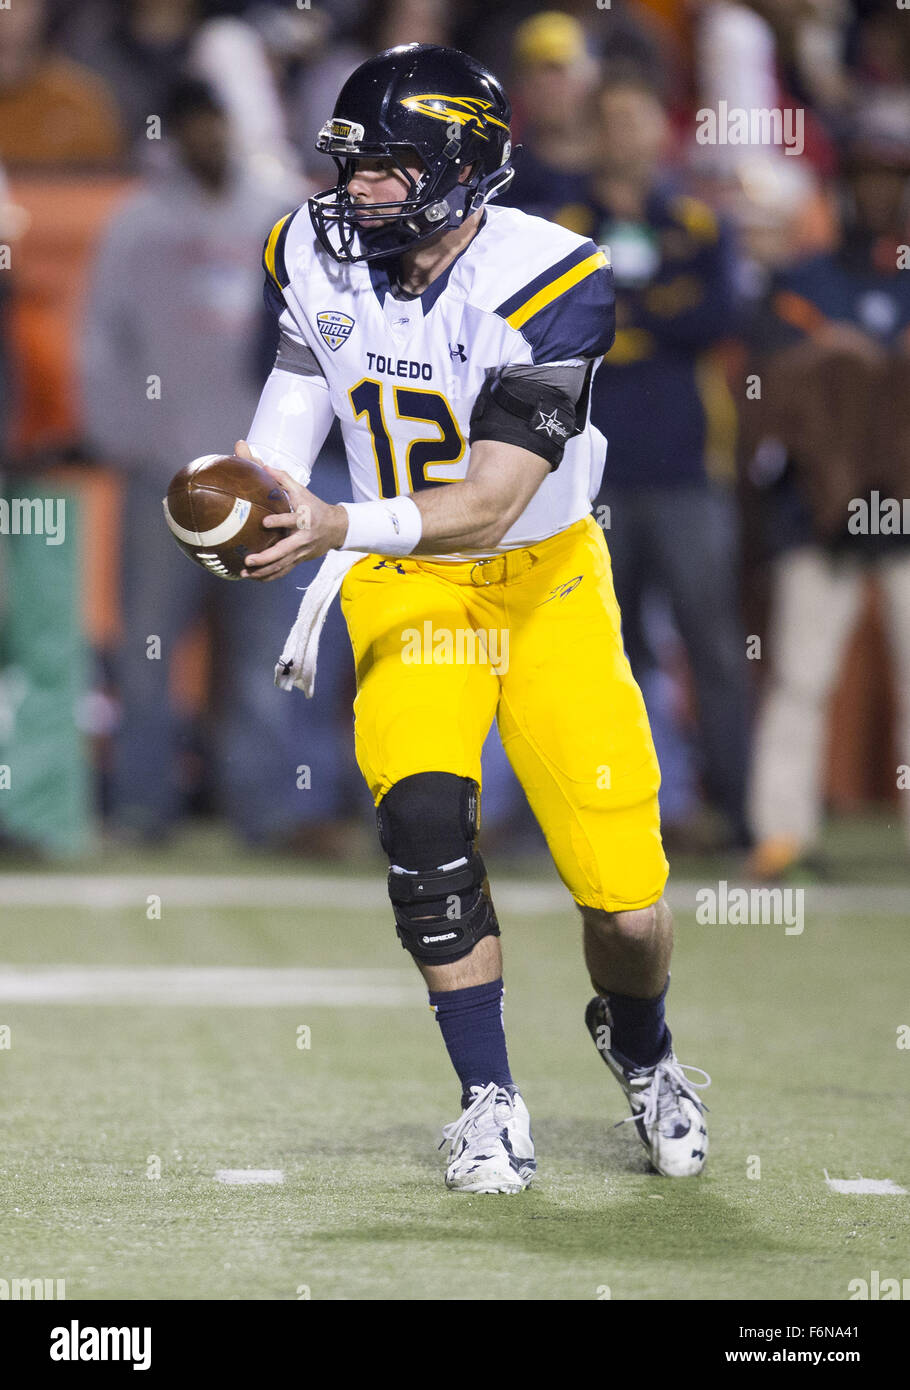 Bowling Green, Ohio, USA. 17th Nov, 2015. Toledo quarterback Phillip Ely (12) during NCAA football game action between the Toledo Rockets and the Bowling Green Falcons at Doyt L. Perry Stadium in Bowling Green, Ohio. Toledo defeated Bowling Green 44-28. John Mersits/CSM/Alamy Live News Stock Photo